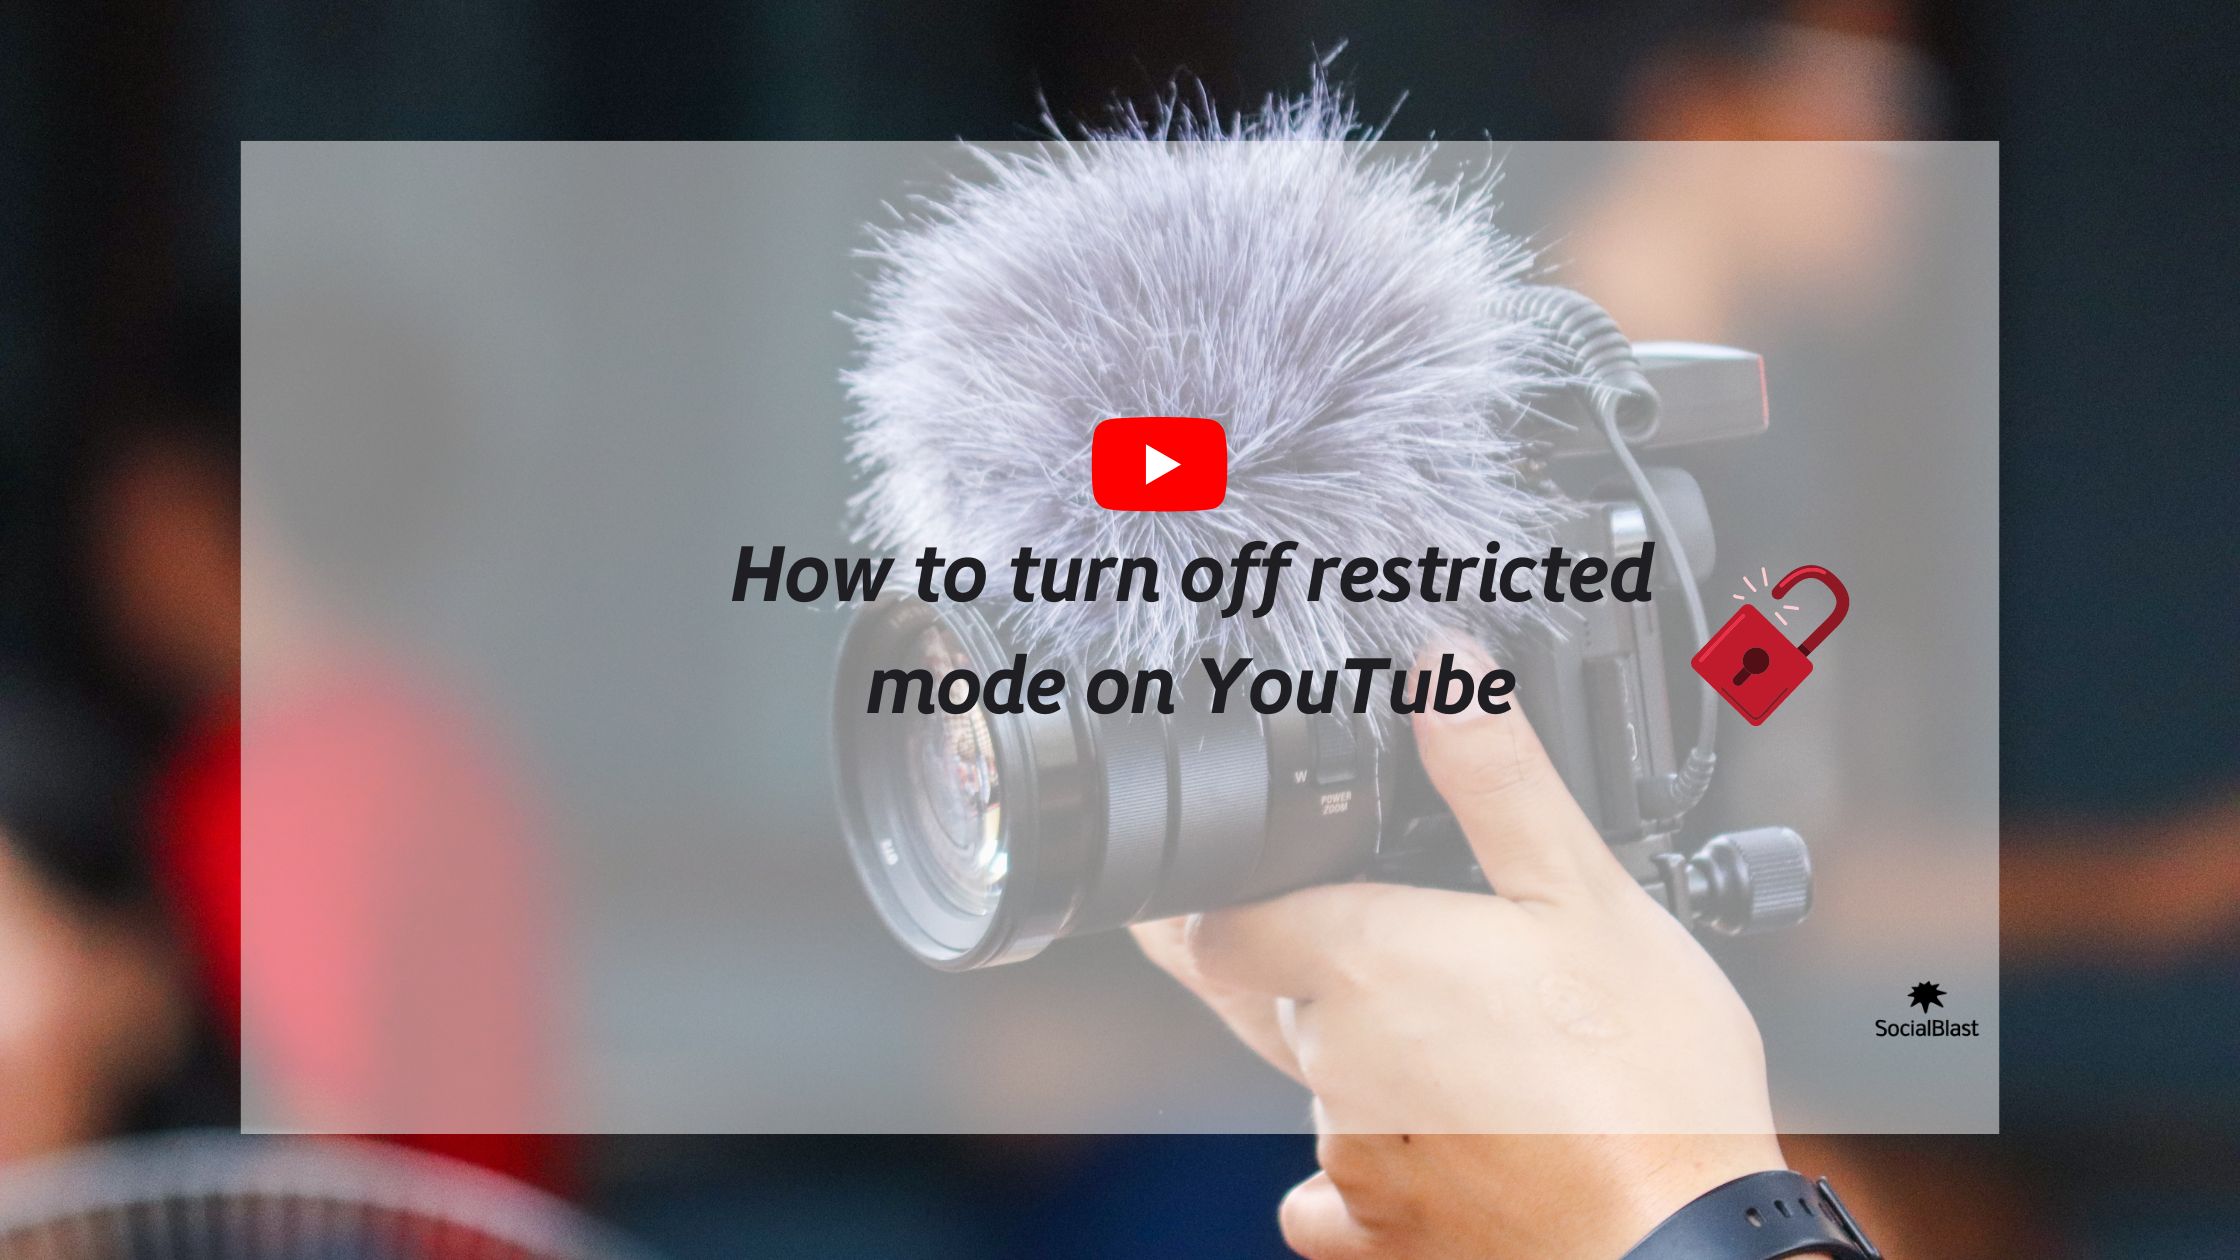 how to disable the restricted mode on YouTube